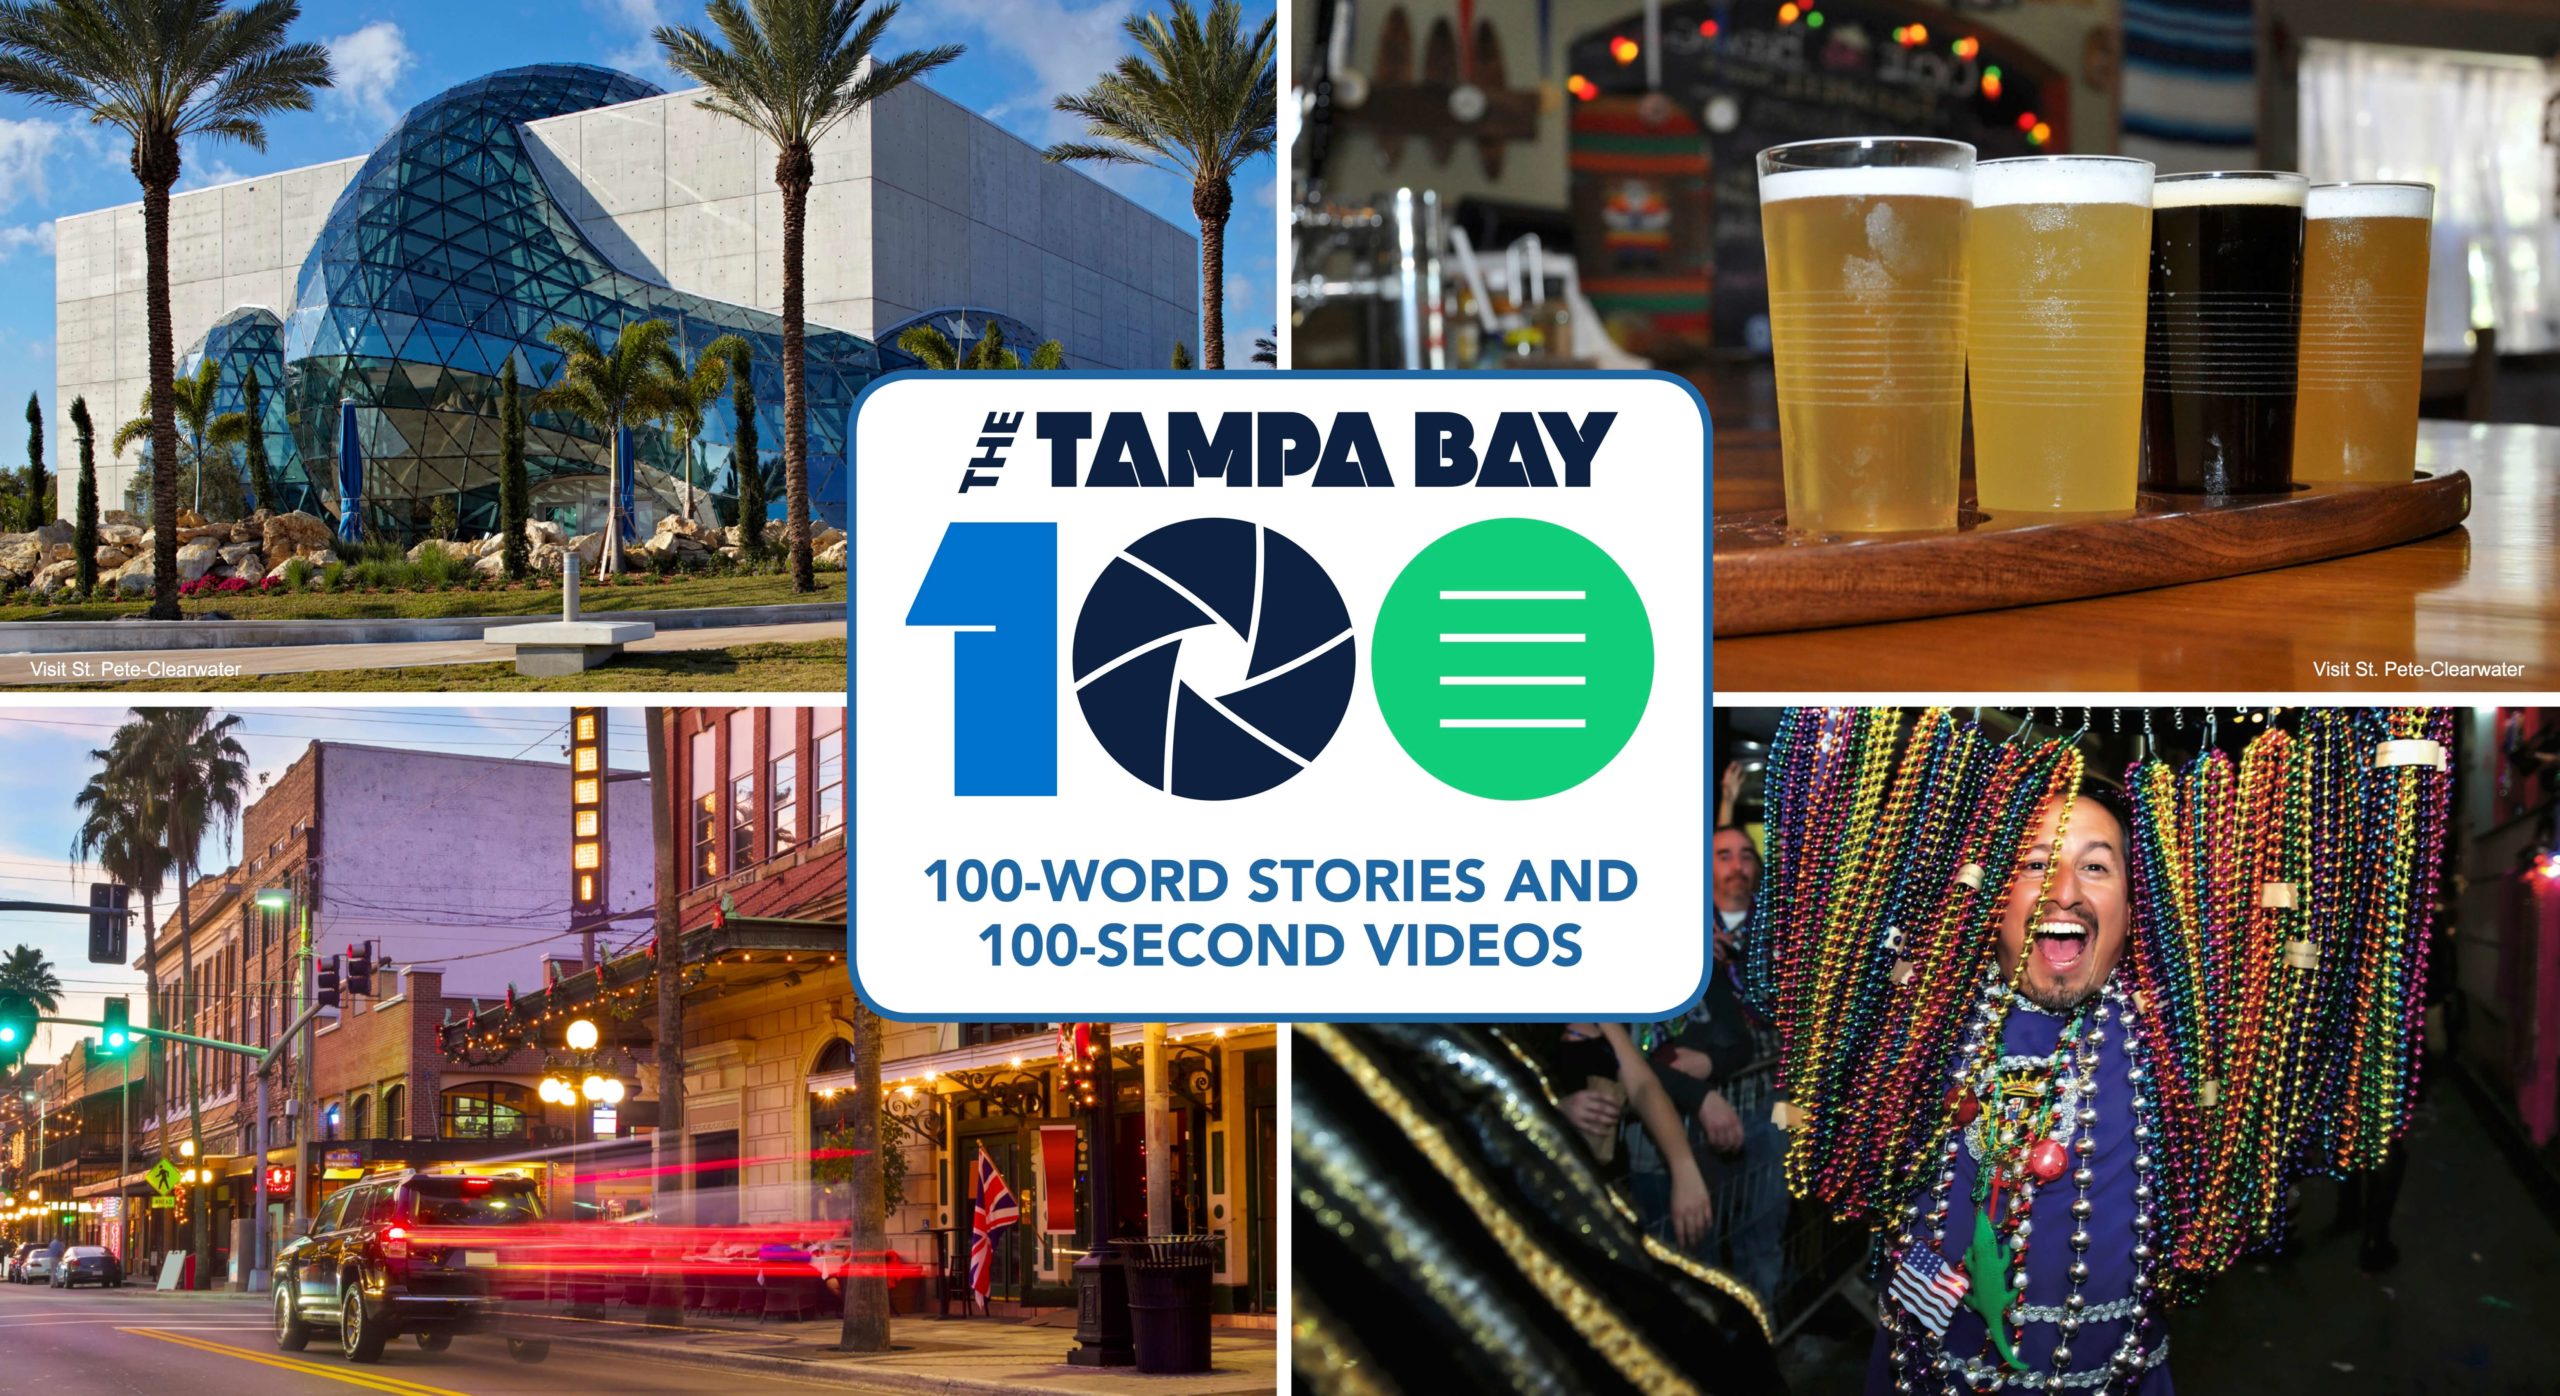 The Tampa Bay 100